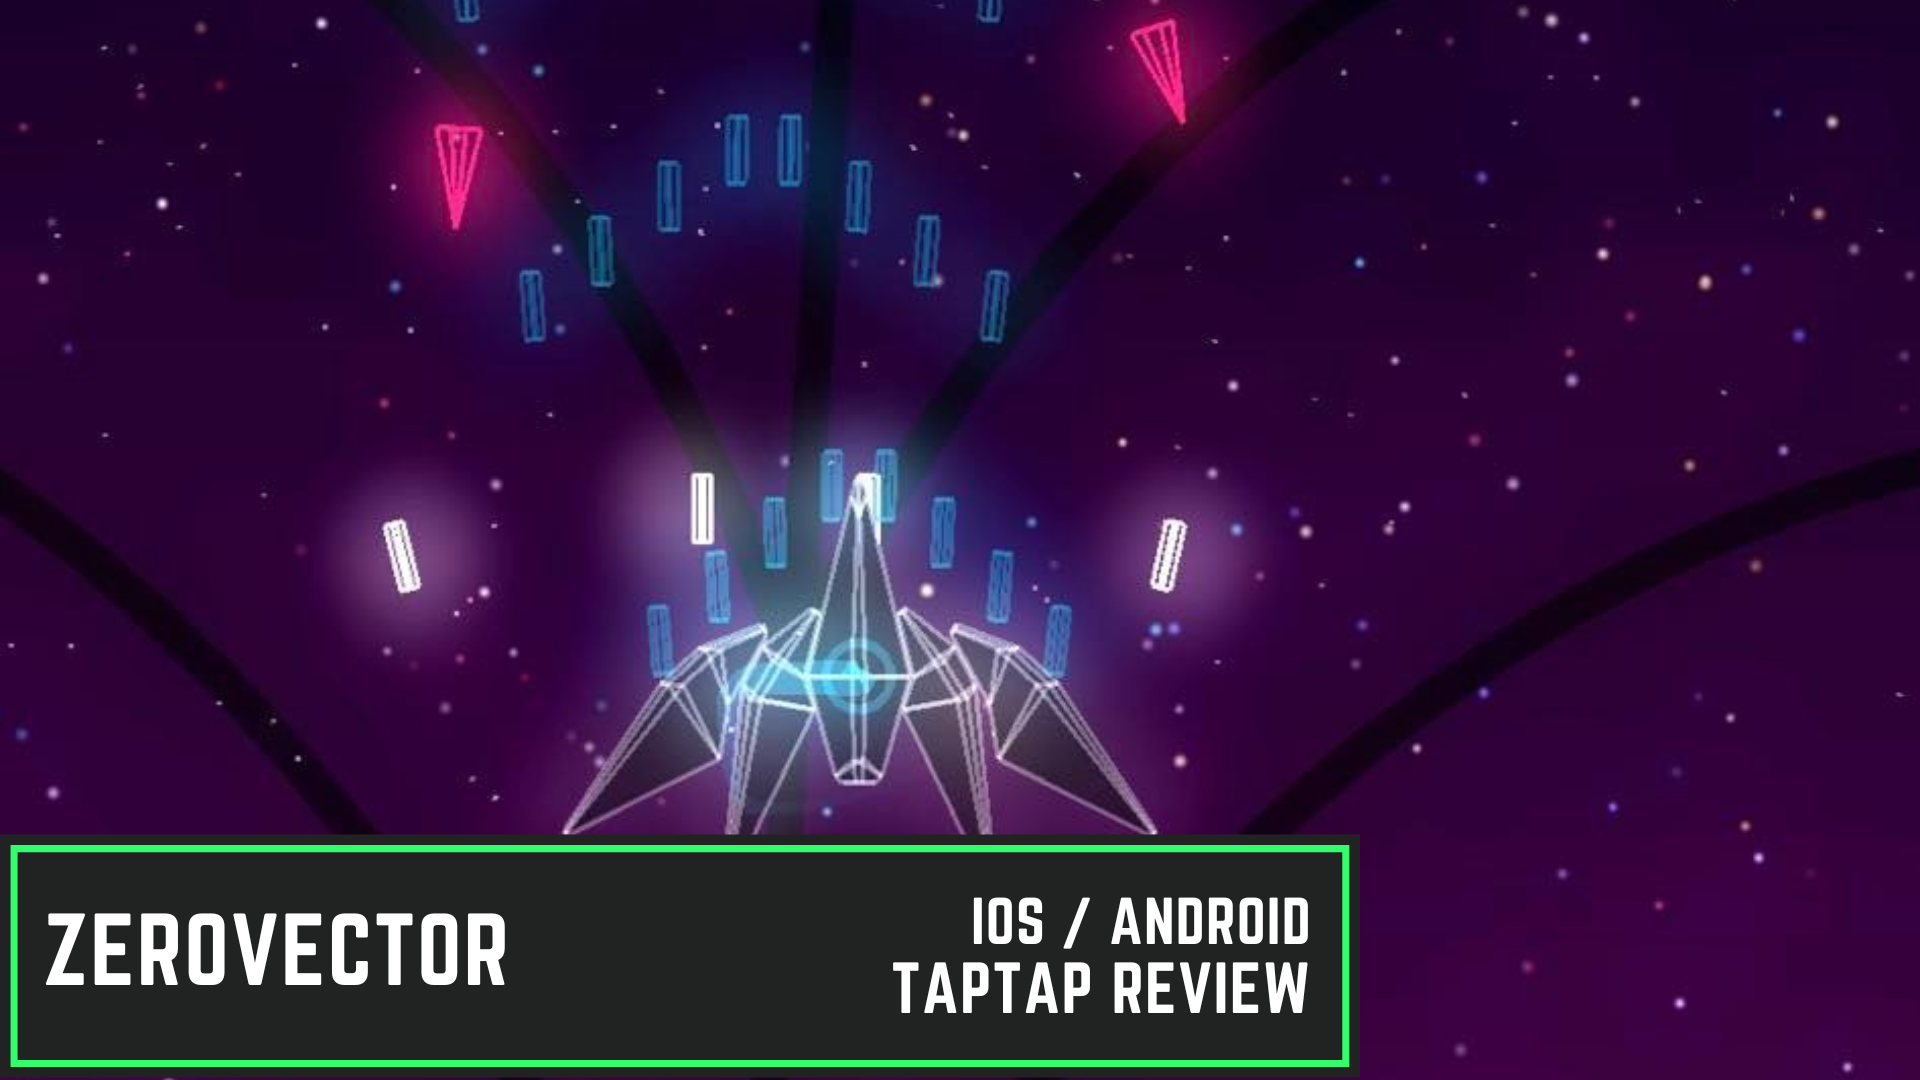 Reminiscing my childhood games - ZeroVector - TapTap